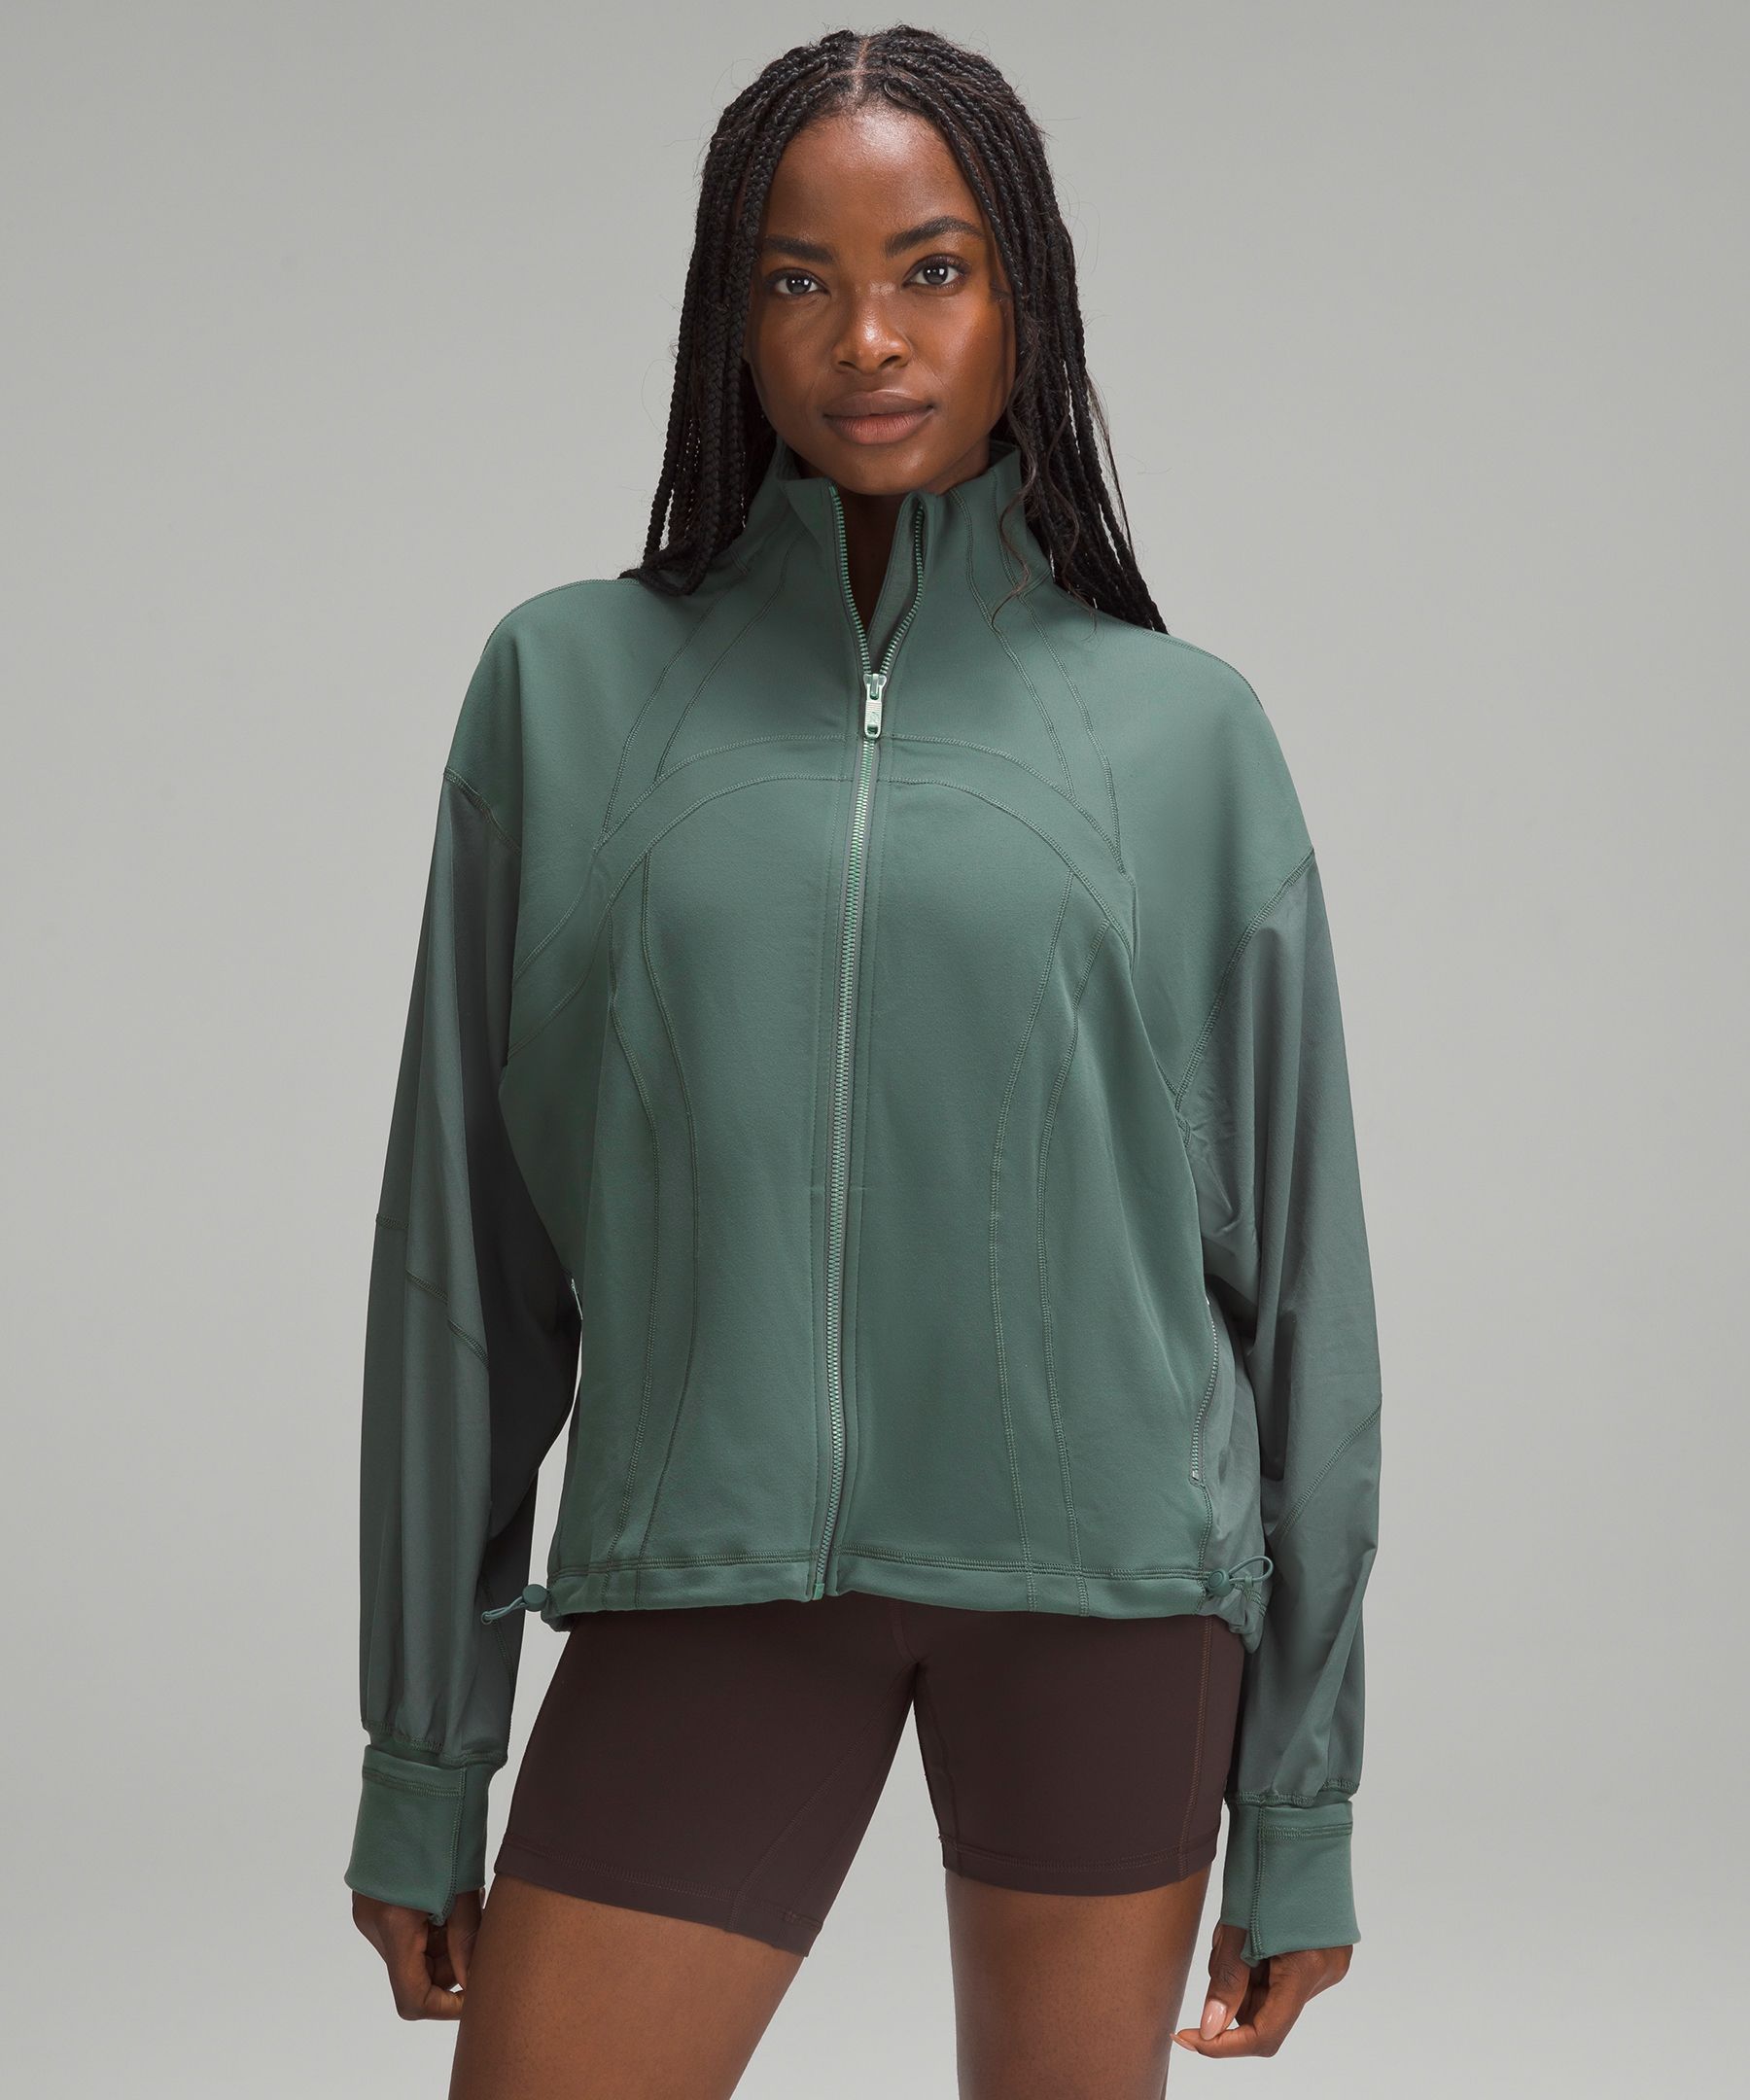 lululemon Spring Jackets You Need (for Women!) - Nourish, Move, Love